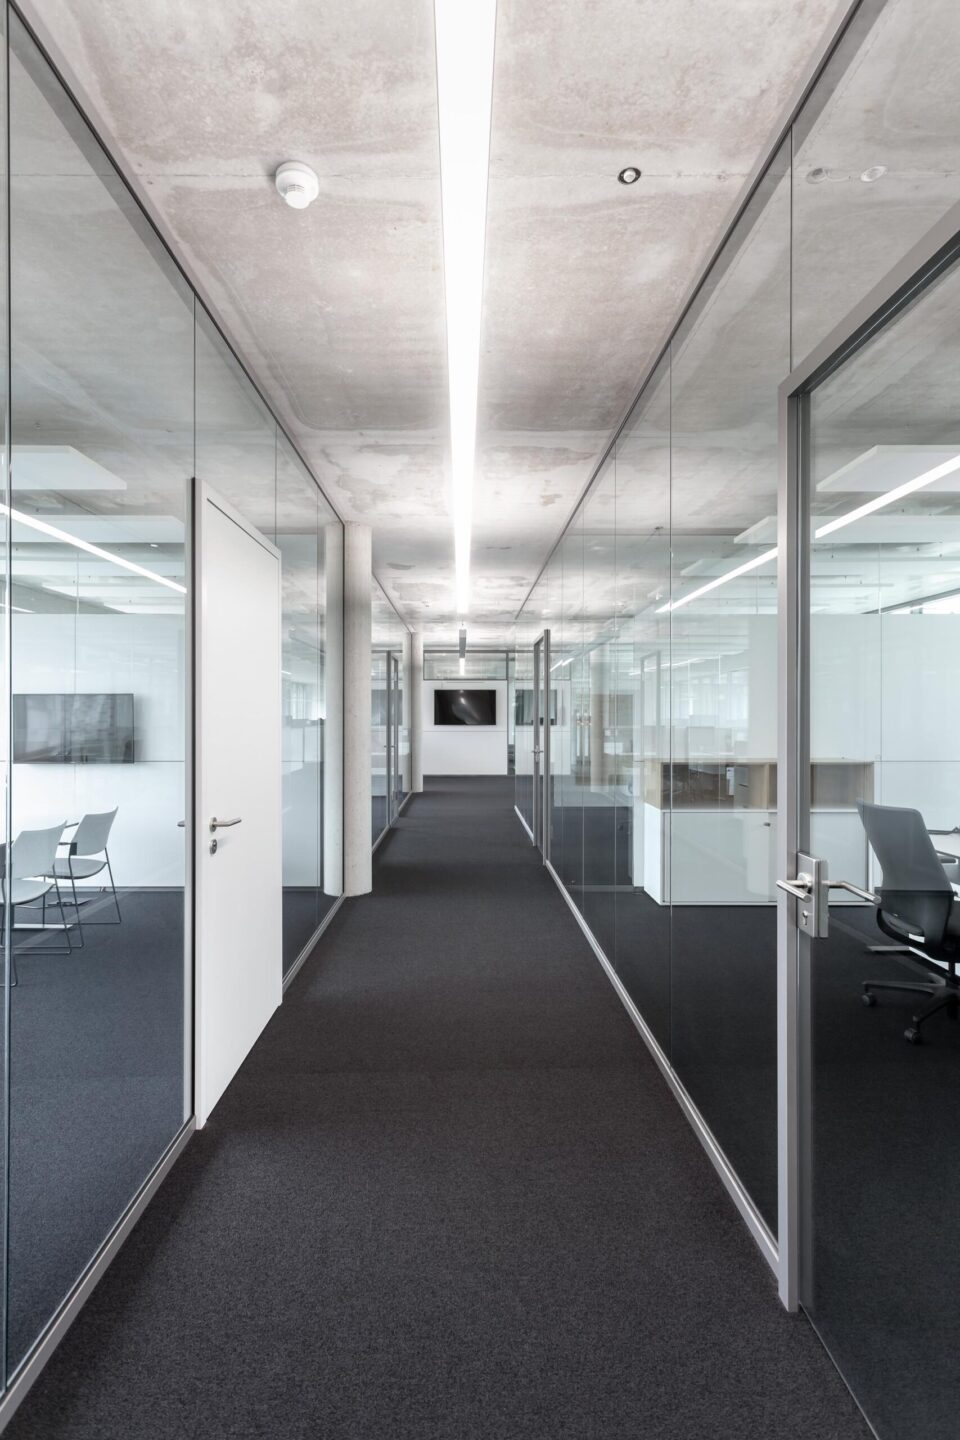 feco-feederle│partition wall systems│projects│weisenburger Karlsruhe